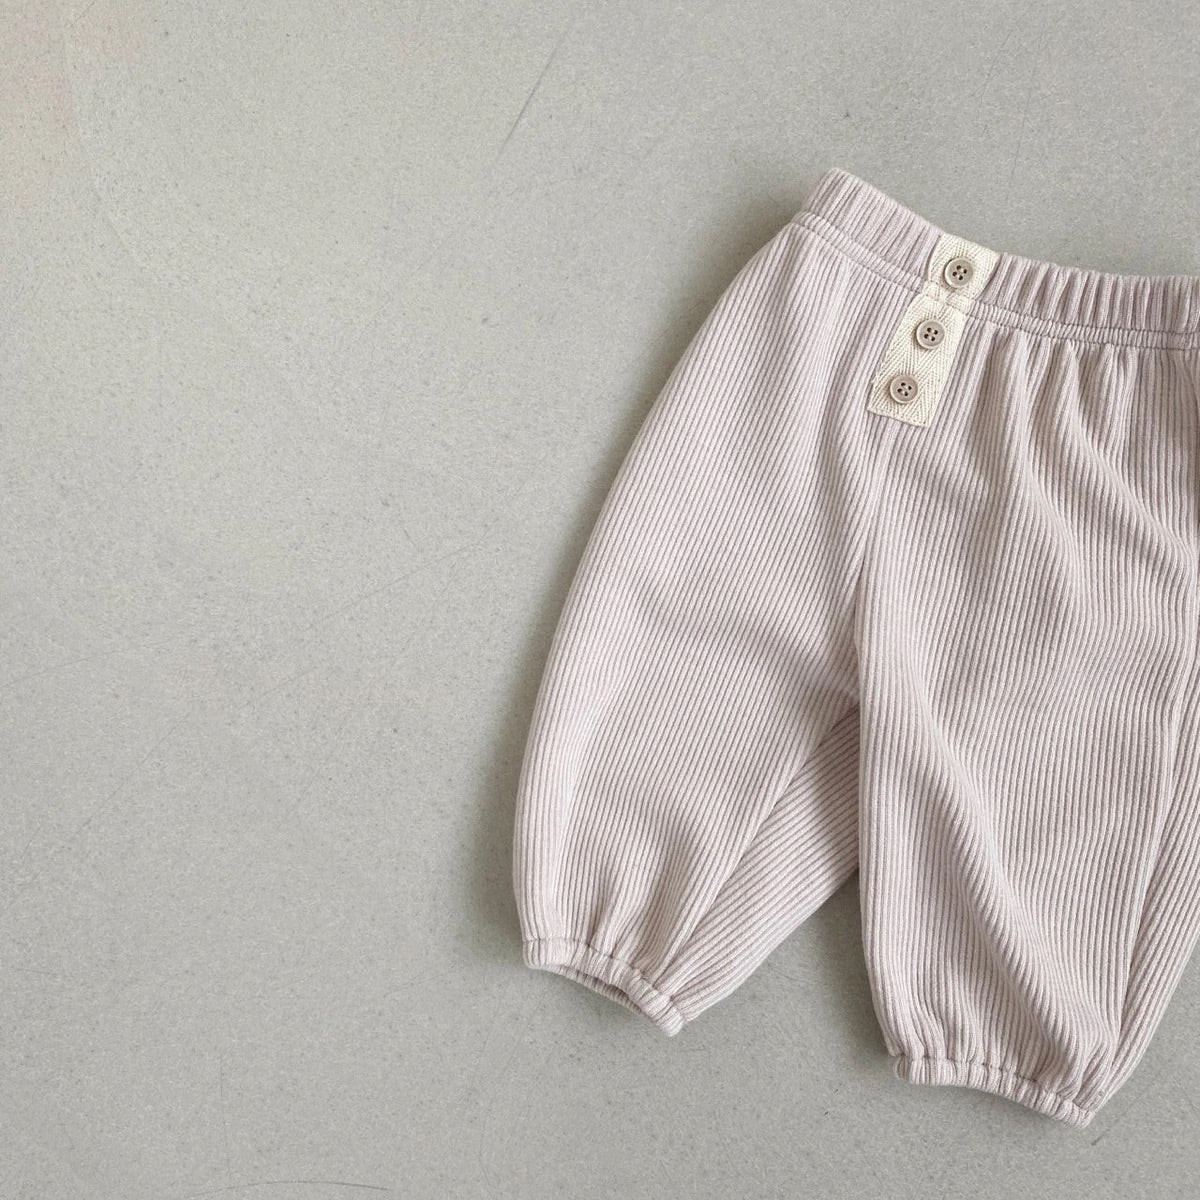 Vera Rib Pants find Stylish Fashion for Little People- at Little Foxx Concept Store